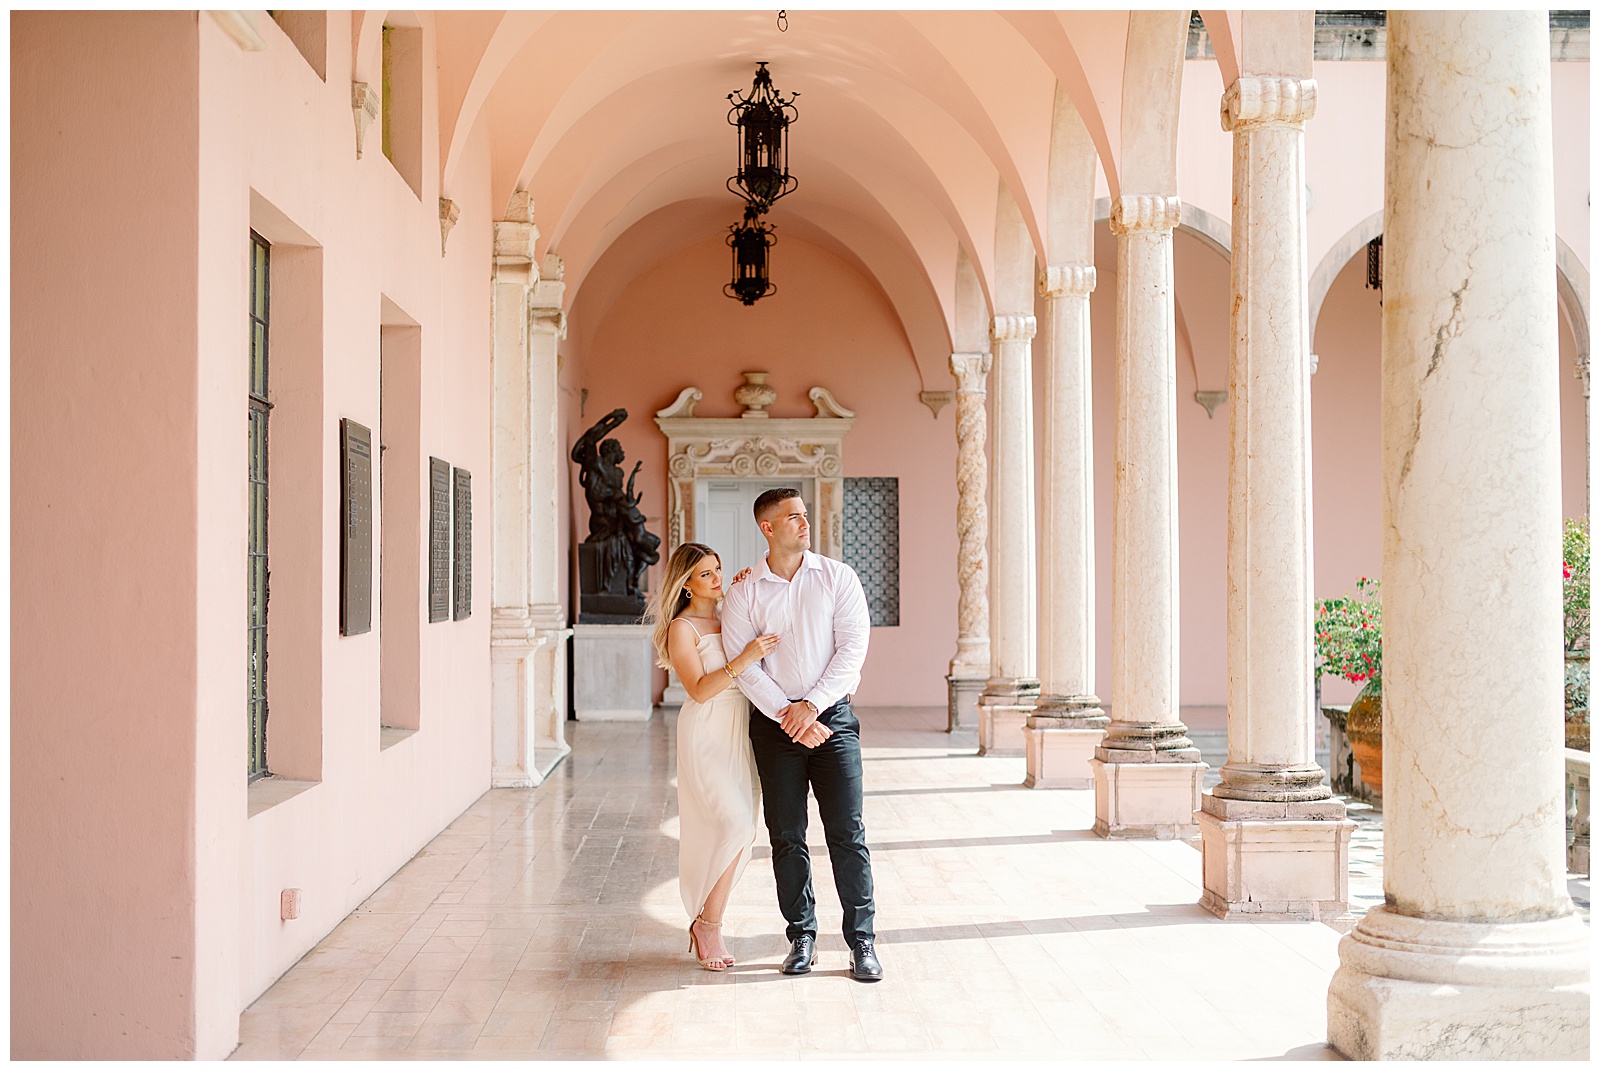 Top 10 things to do after getting engaged, tampa engagement, tampa wedding photographer, tampa engagement photographer, tampa proposal photographer, tampa photographer, luxury wedding photographer, luxury photography, wedding tips, wedding planning, downtown tampa, downtown tampa engagement photography, downtown tampa wedding, sarasota wedding photographer, sarasota photographer, the ringling museum, the ringling museum wedding photographer, sarasota luxury wedding, jennifer mattos weddings